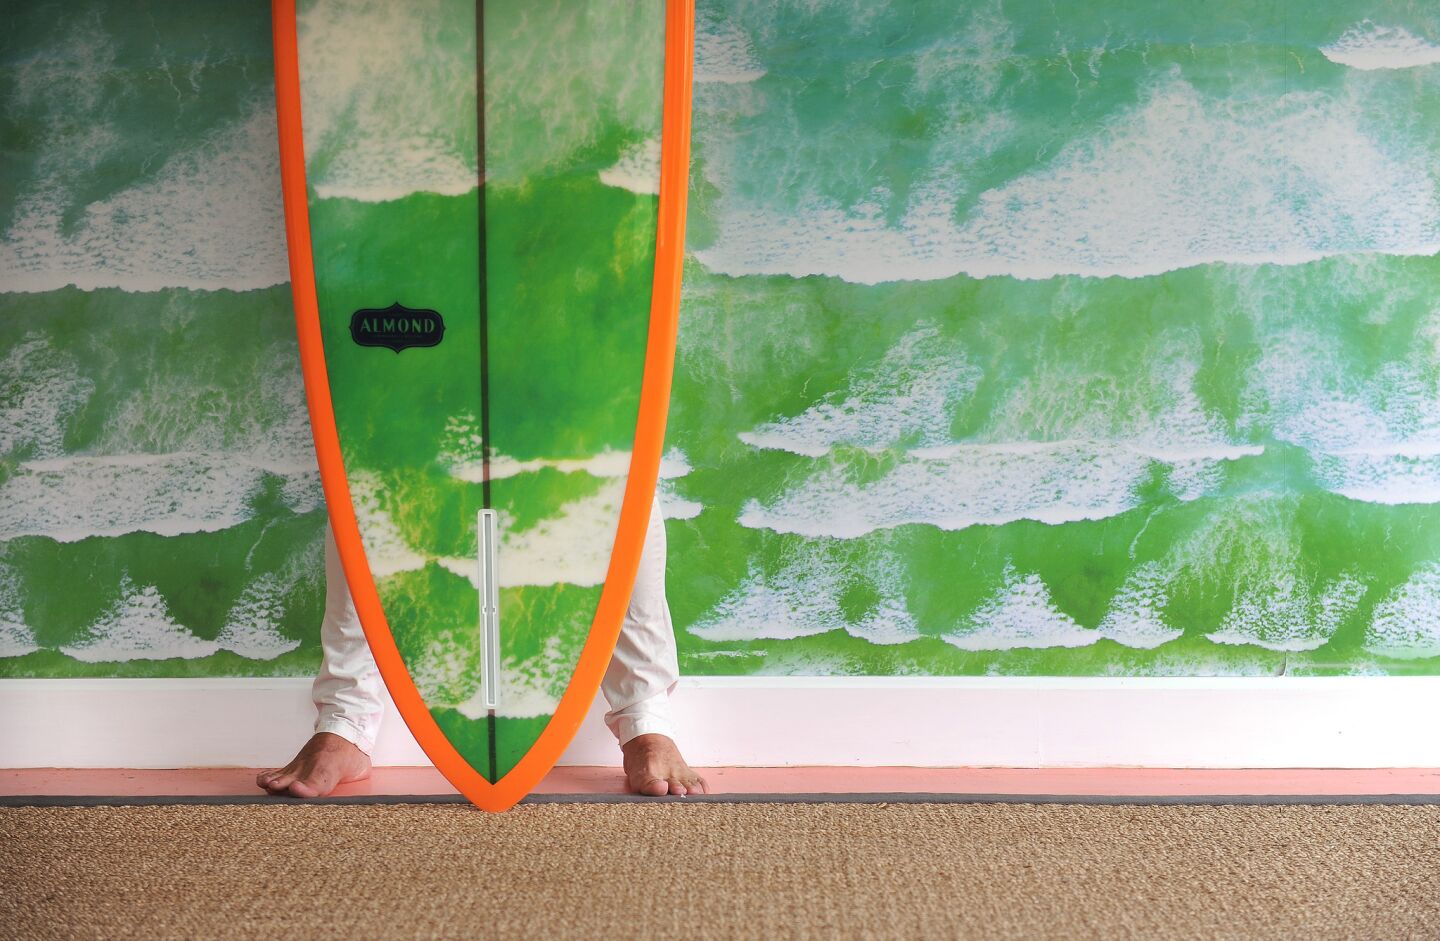 Malin stands behind a surfboard imprinted with his "Cape Town Waves" image.